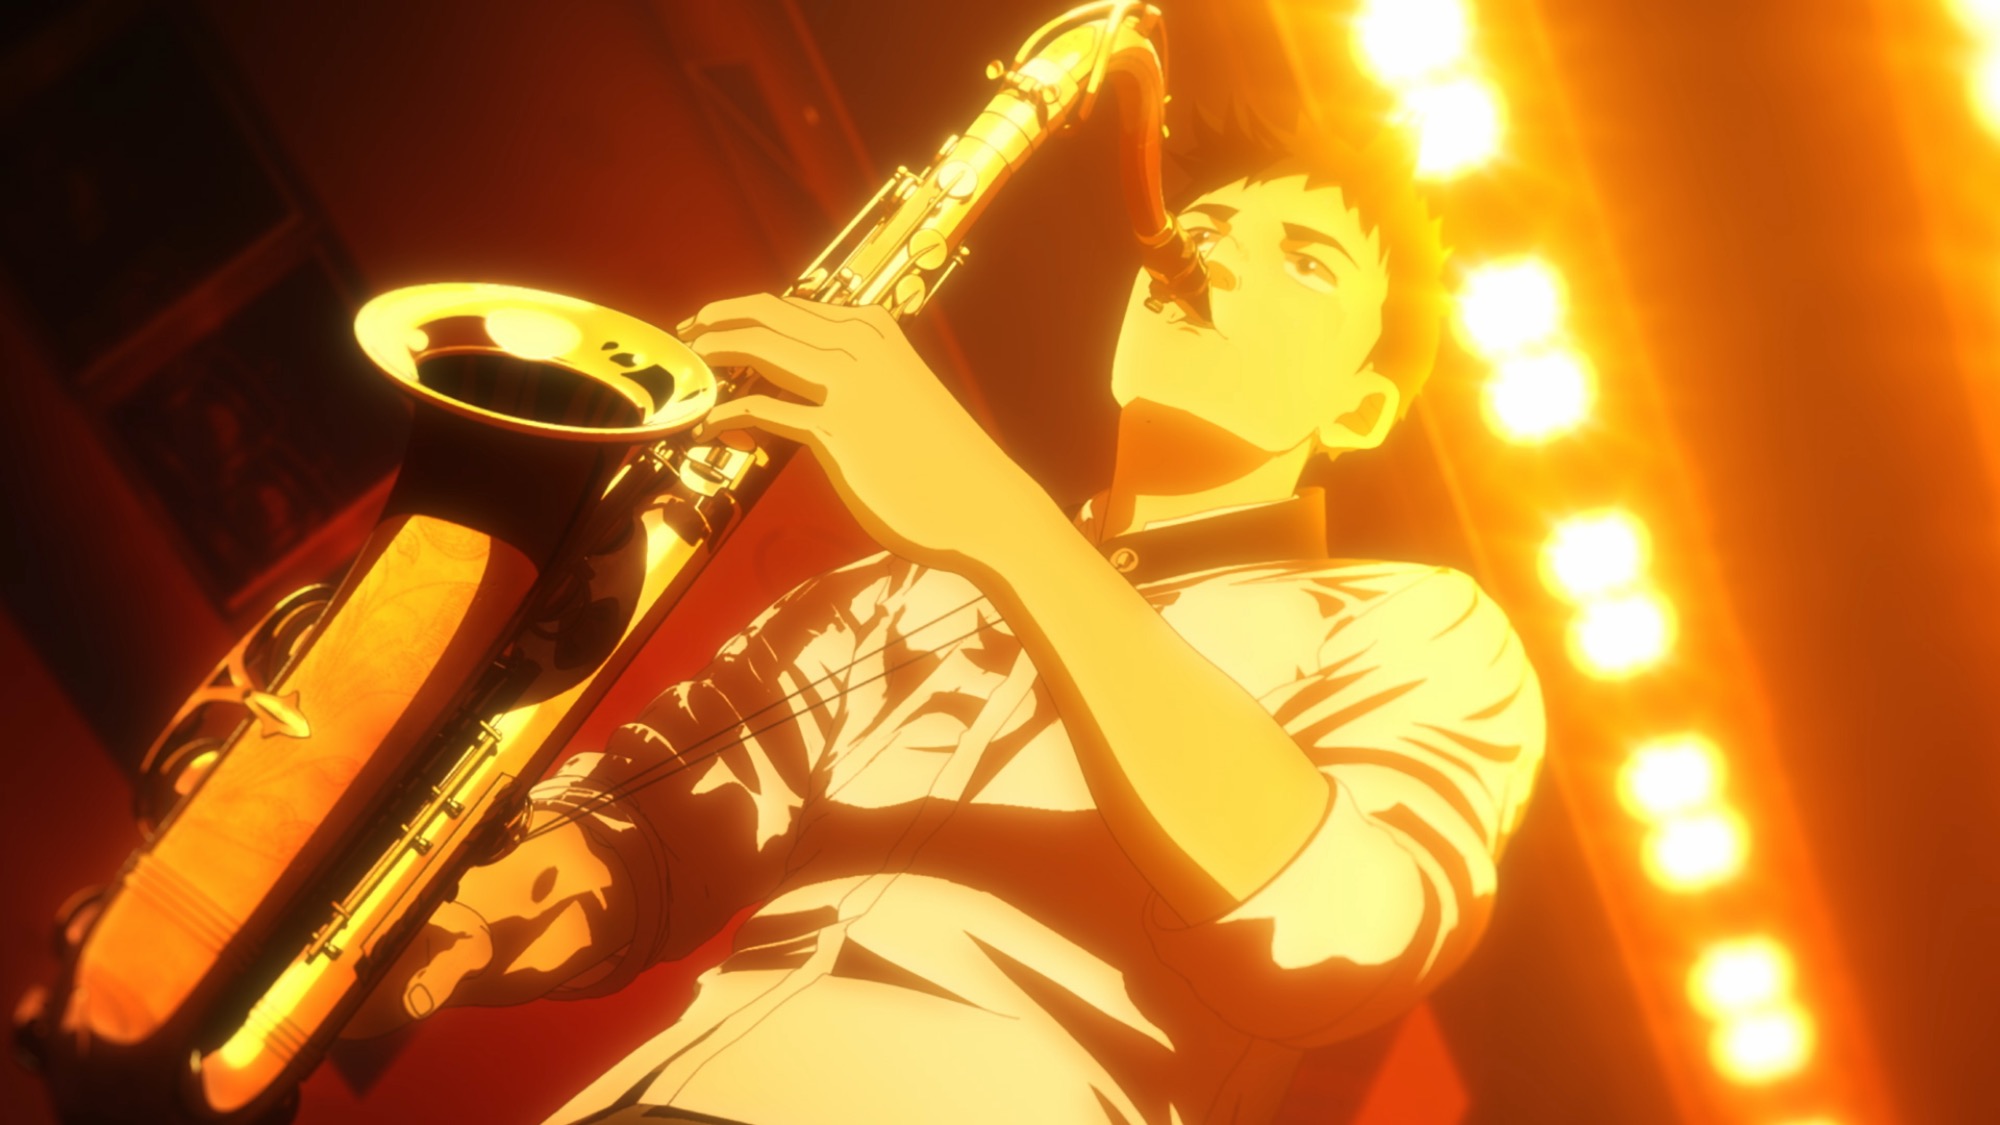 <div></noscript>REVIEW: Blue Giant's Anime Adaptation Brings Jazz to the Big Screen, But At What Cost?</div>